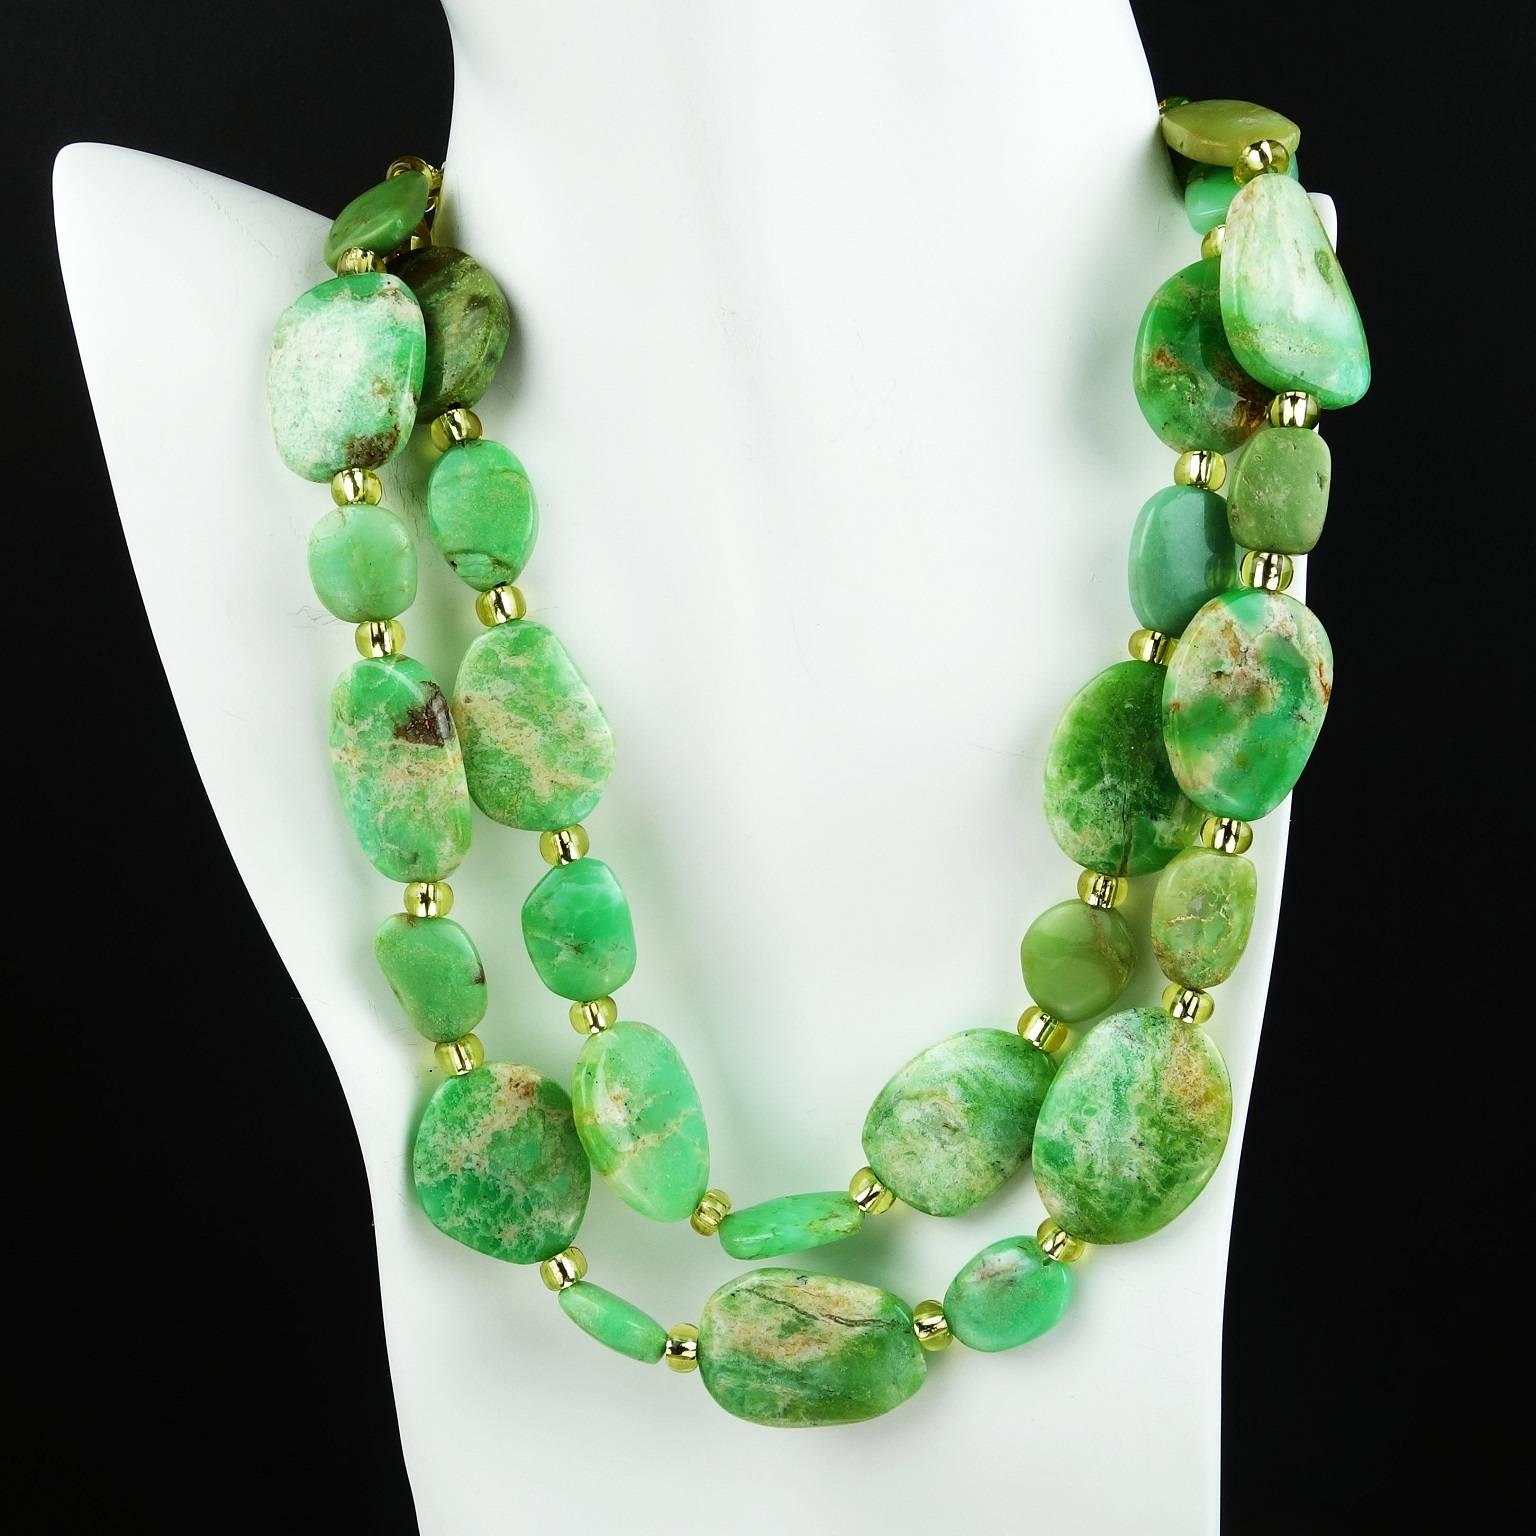 Custom made, green, green Chrysoprase in Flat Uneven Pieces varying from 30x22mm to 15x12mm in a two strand Necklace.  Lovely, soft Green Chrysoprase pieces with some matrix are enhanced with gold Czech beads and a Citrine clasp.  This unique